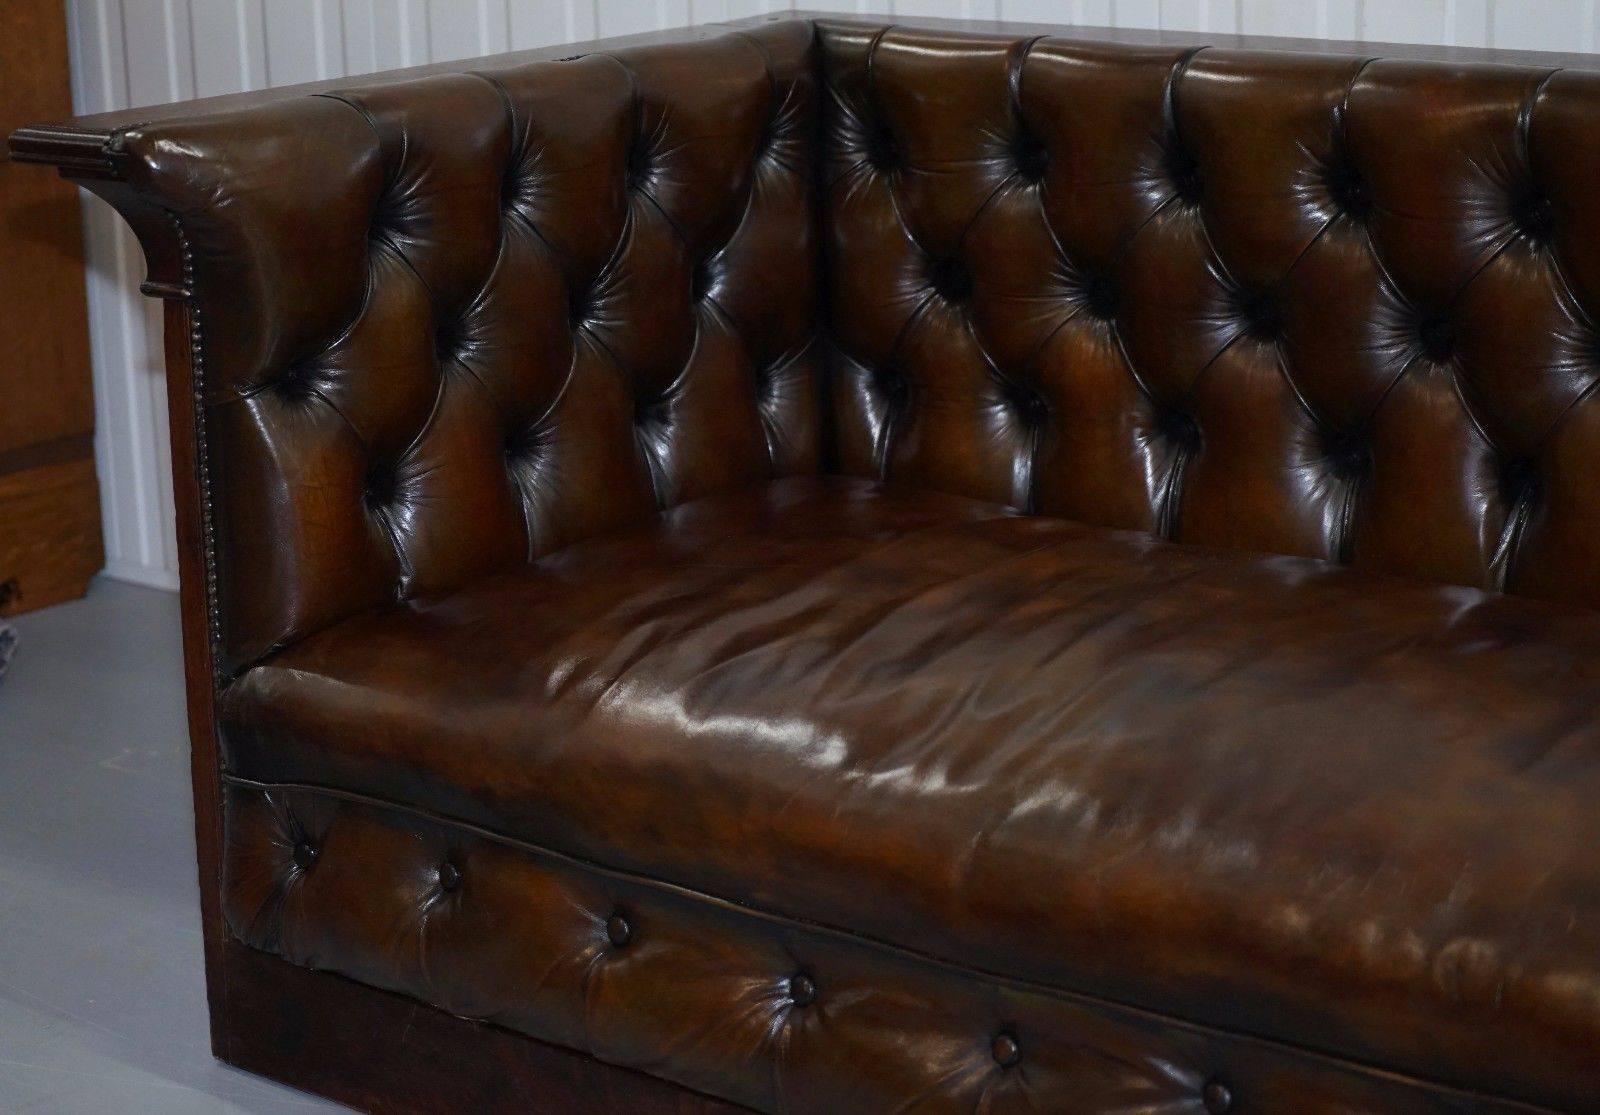 We are delighted to offer for sale this original fully restored late Victorian, circa 1890 Panelled oak Arts & Crafts Mission sofa buttoned in the Chesterfield manor

Please note the delivery fee is just a guide, for an accurate quote please